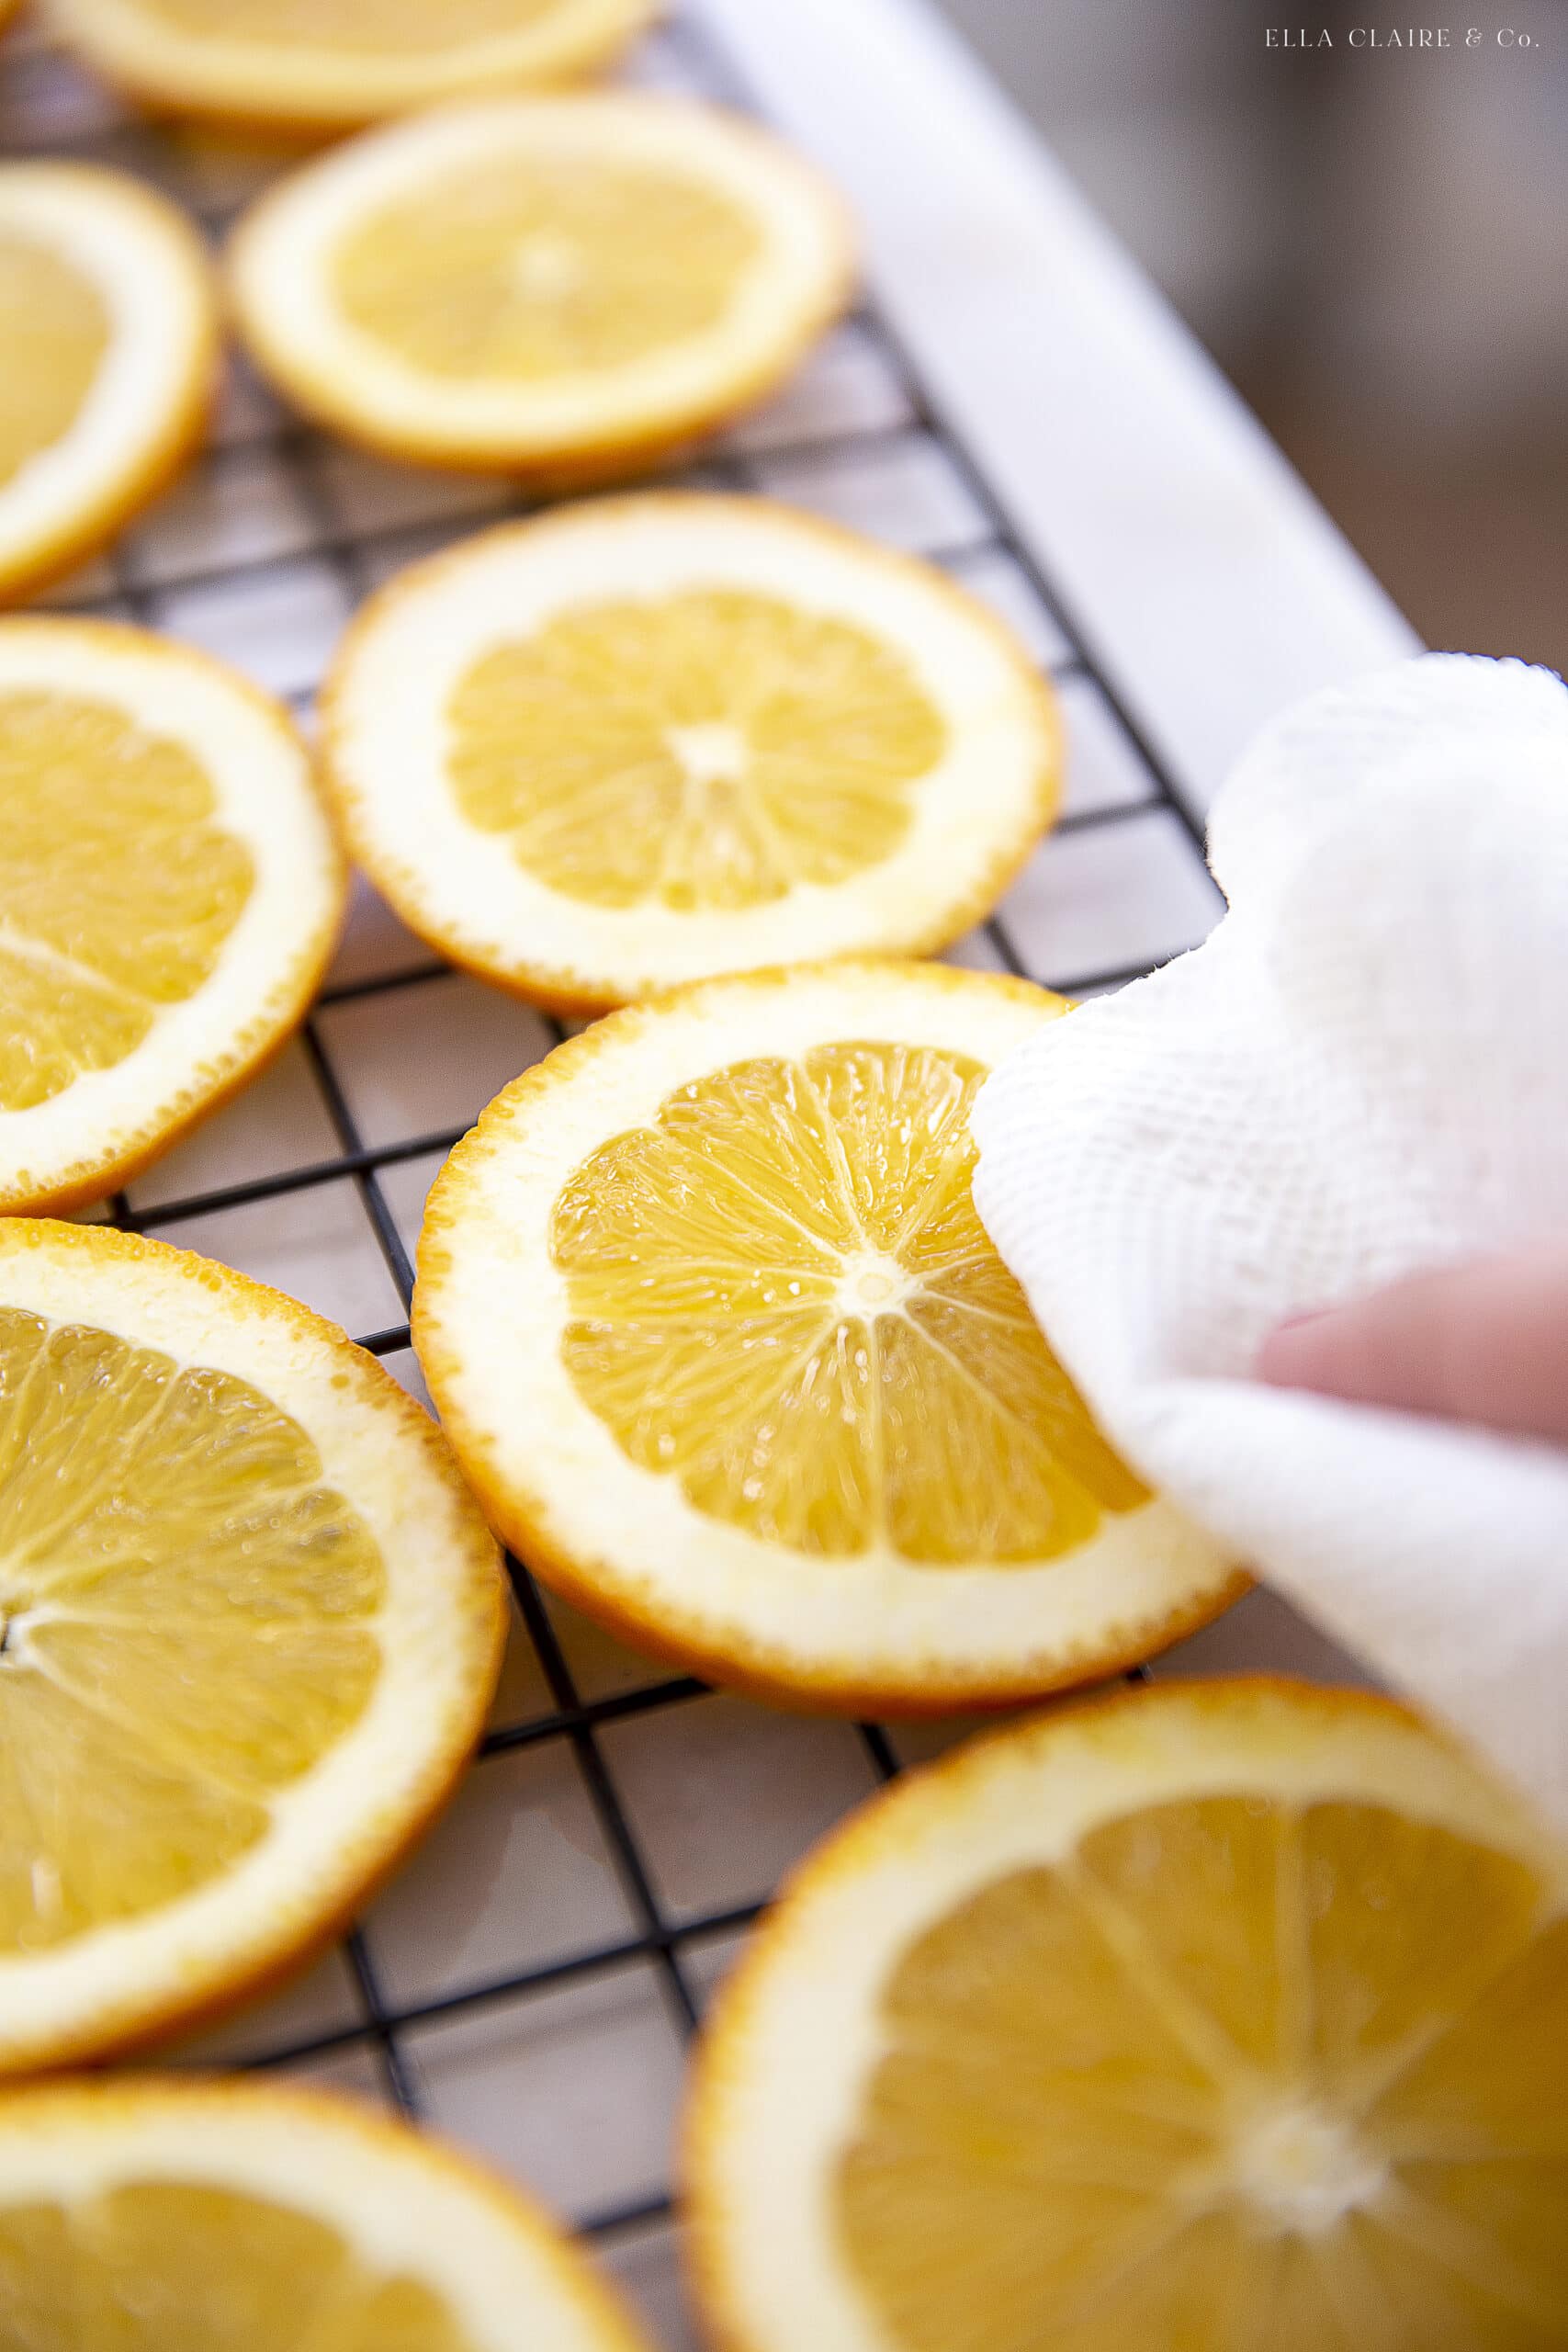 patting dry orange slices before dehydrating